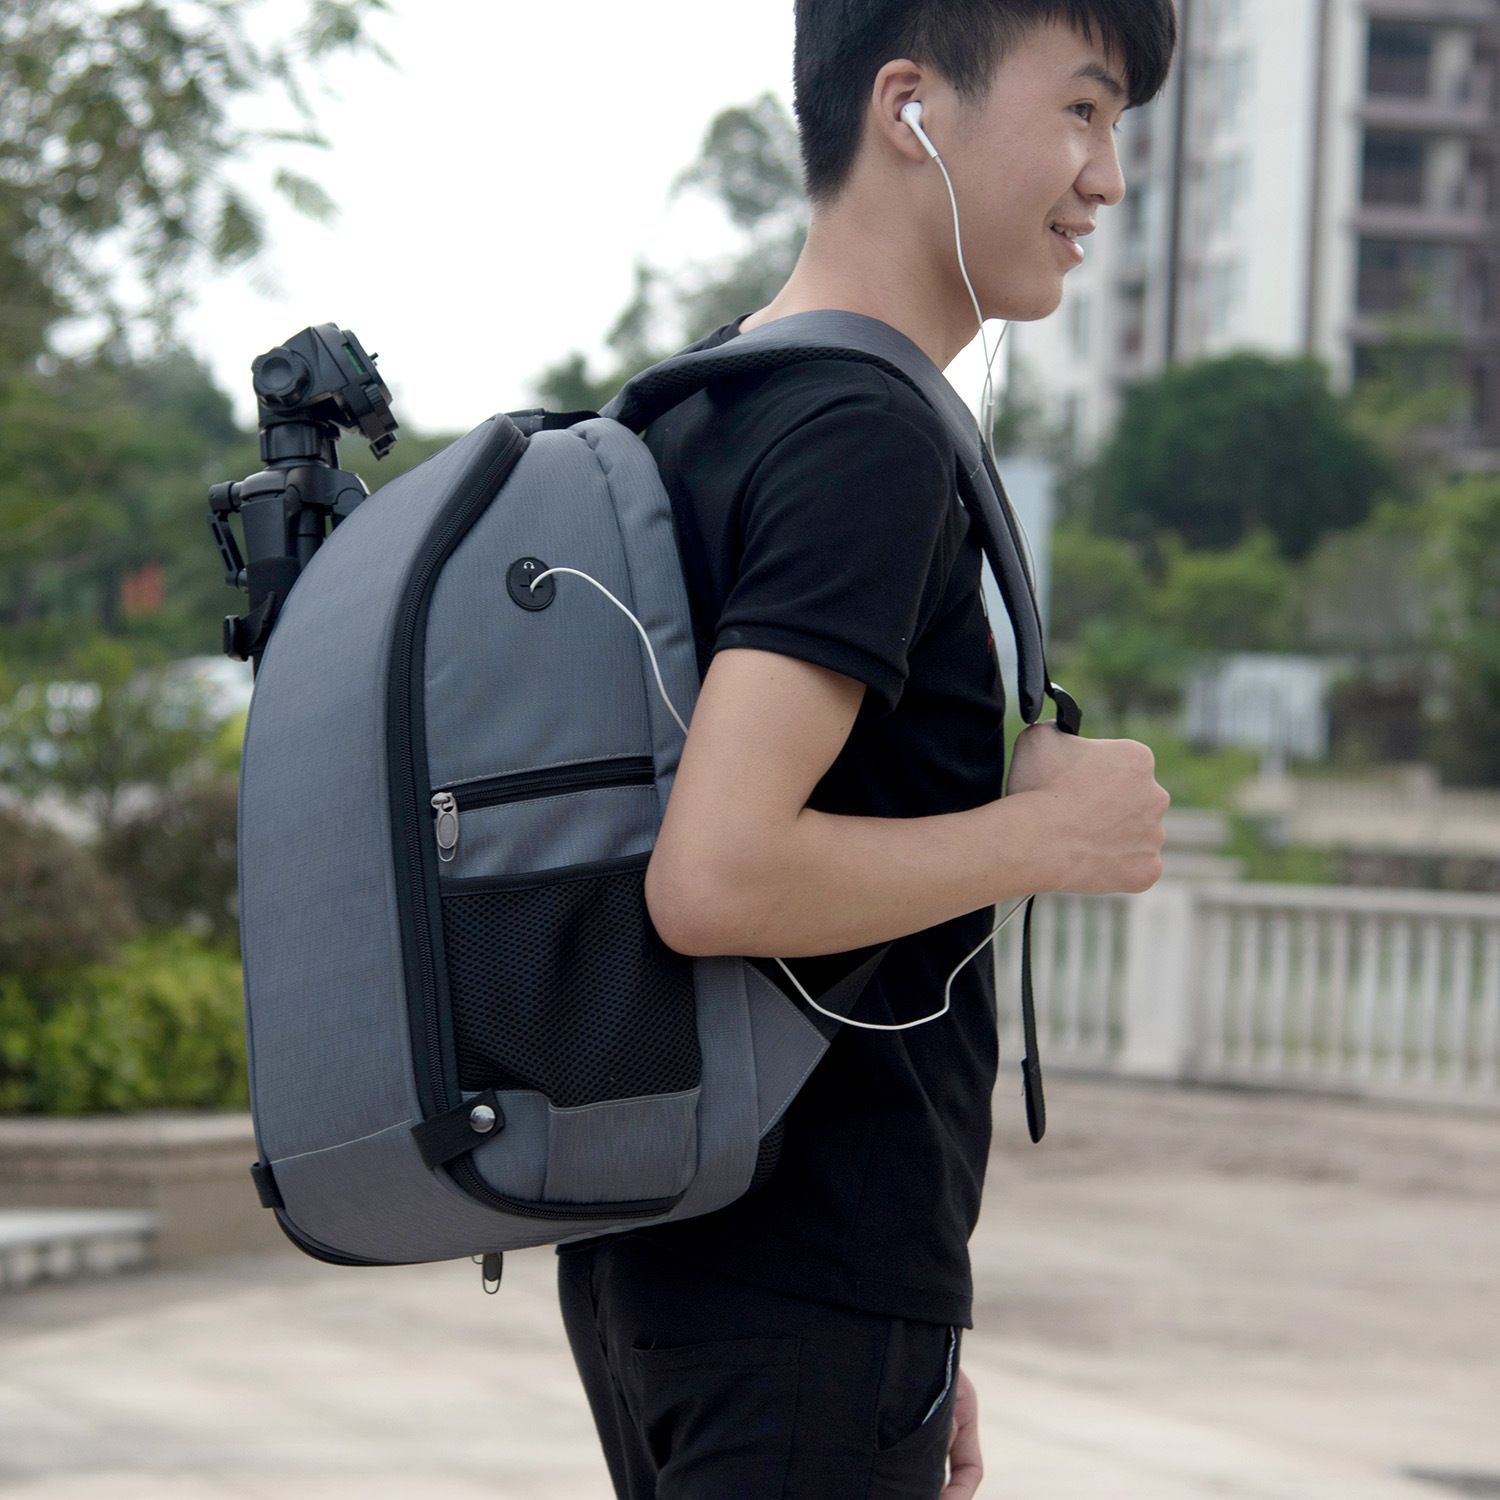 Waterproof-Shockproof-Anti-theft-Storage-Carry-Traval-Bag-Backpack-for-DSLR-Camera-Lens-Tripod-Table-1596735